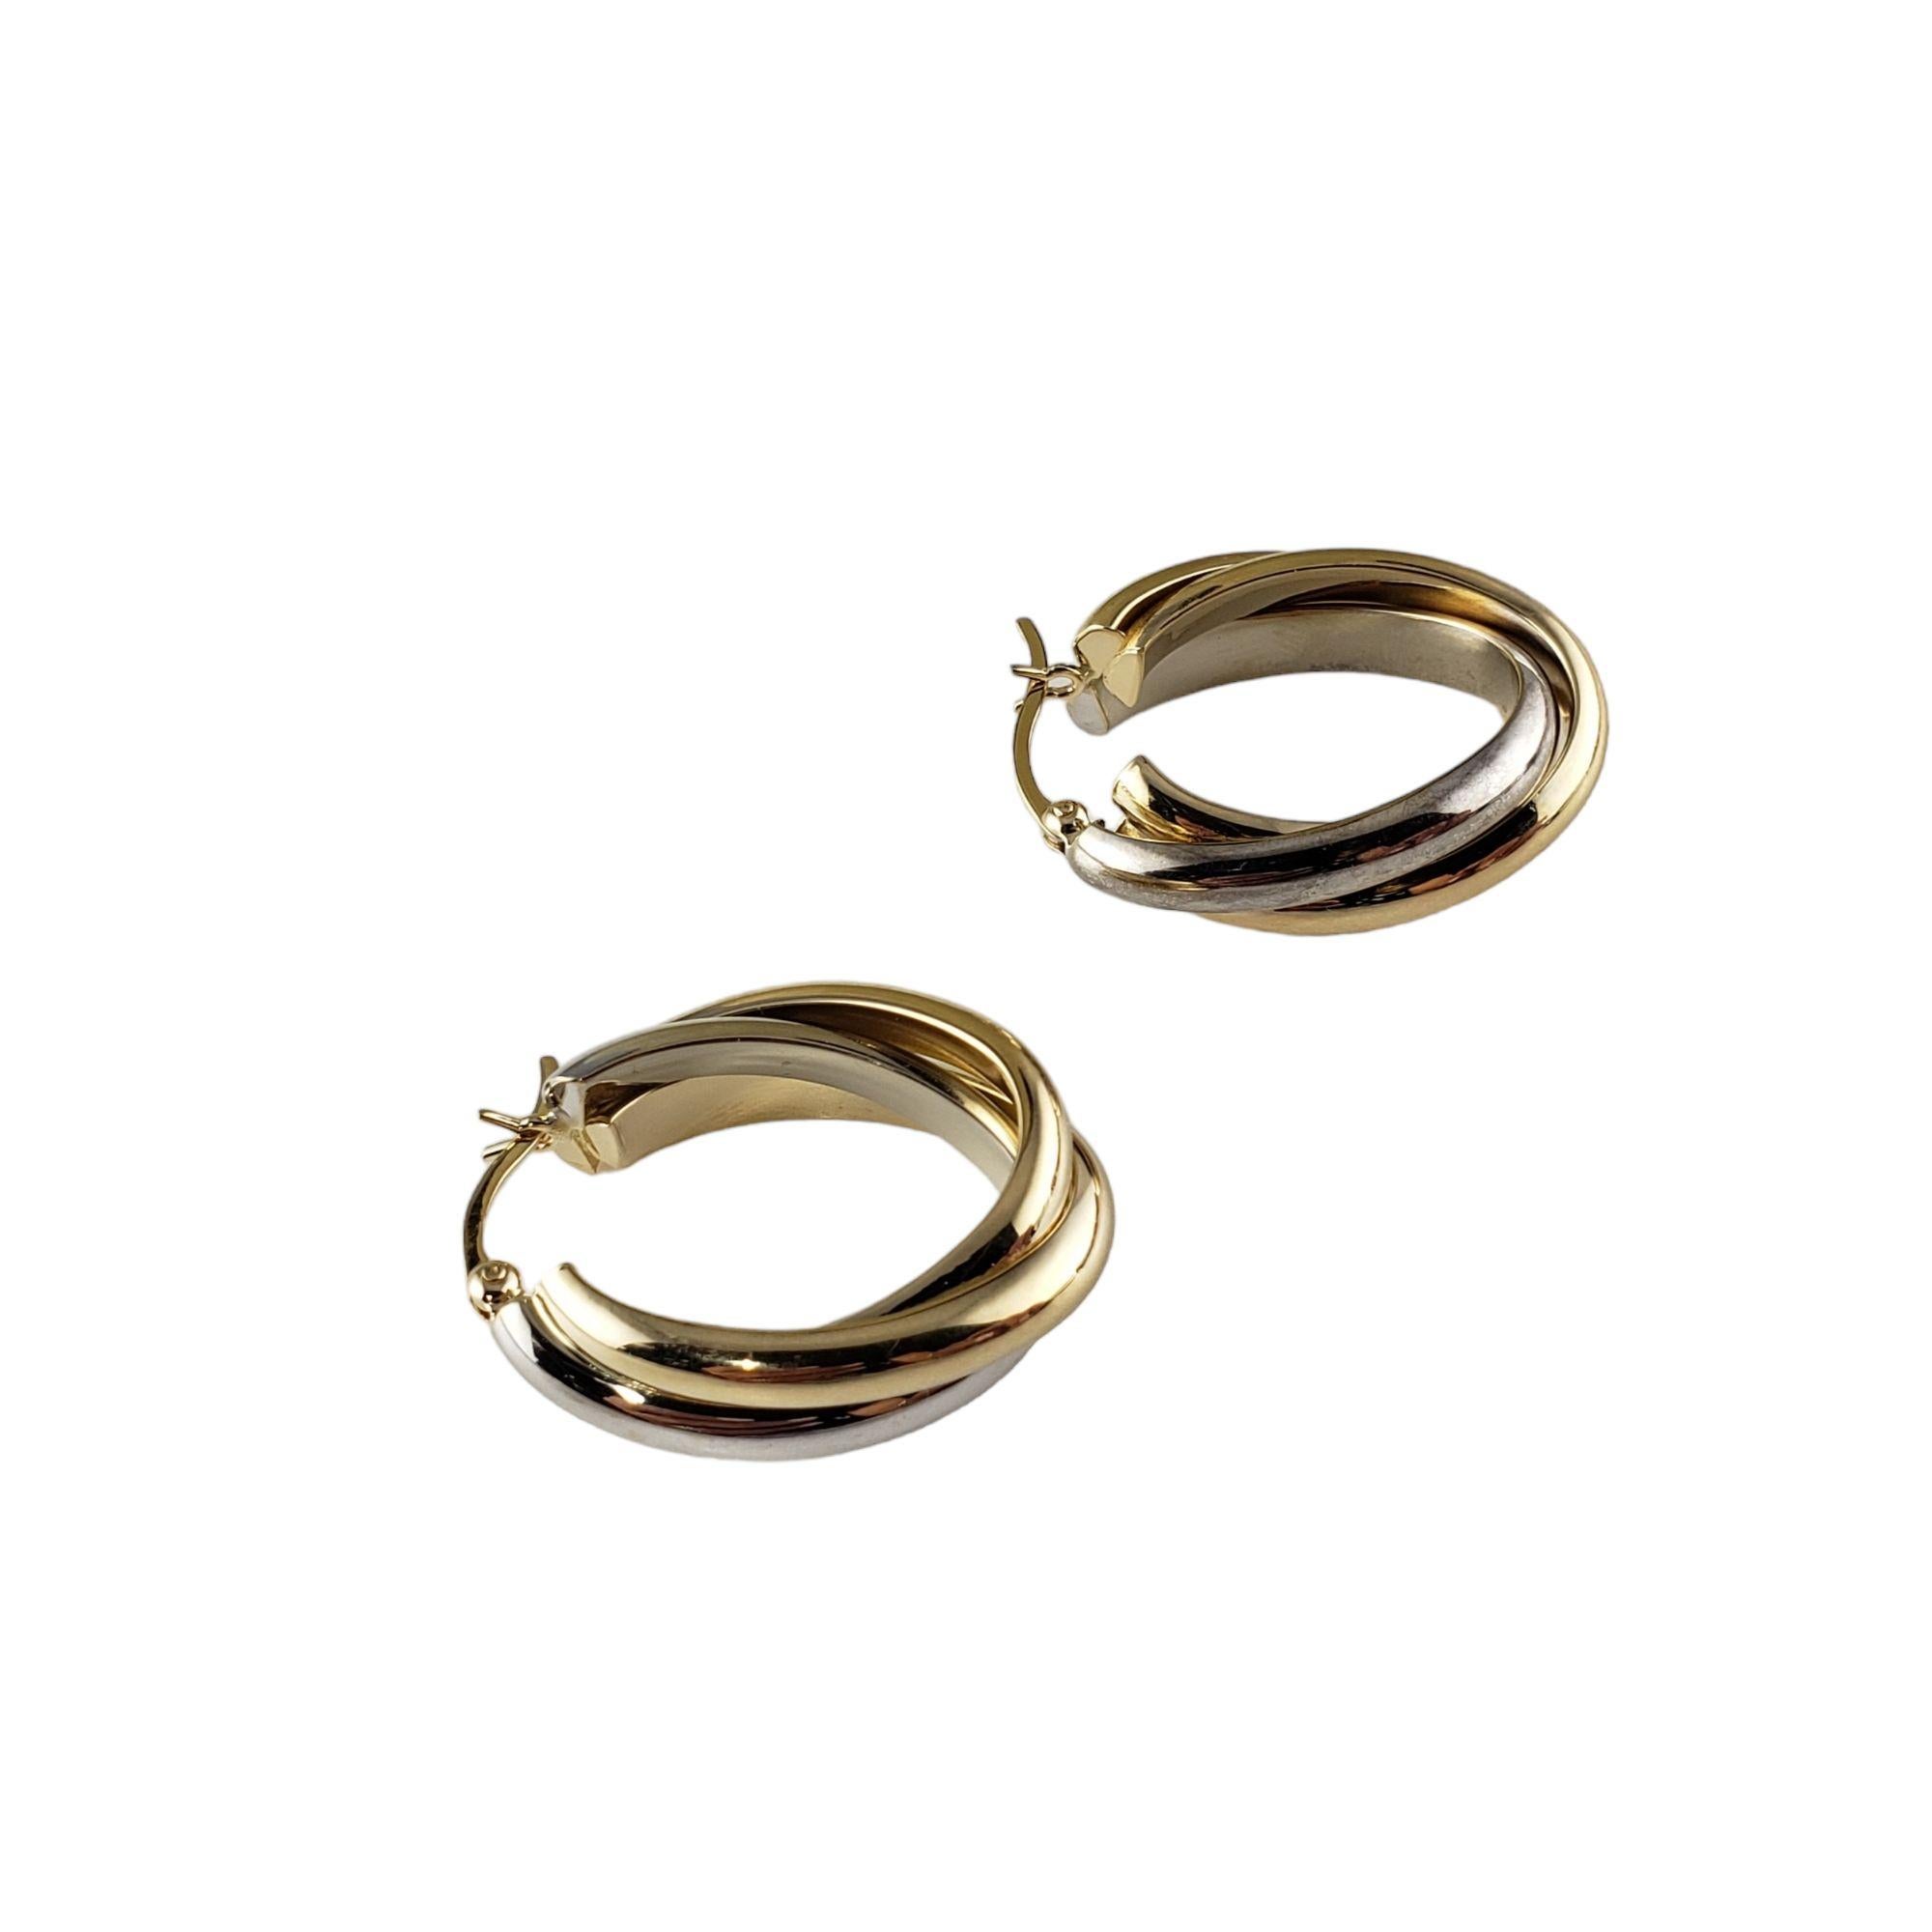 Vintage 14 Karat Yellow/White Gold Twist Hoop Earrings-

These lovely twist hoop earrings are crafted in beautifully detailed 14K yellow and white gold.

Size: 26 mm x 8 mm

Weight: 3.1 gr./ 4.9 dwt.

Stamped: 585

Very good condition,